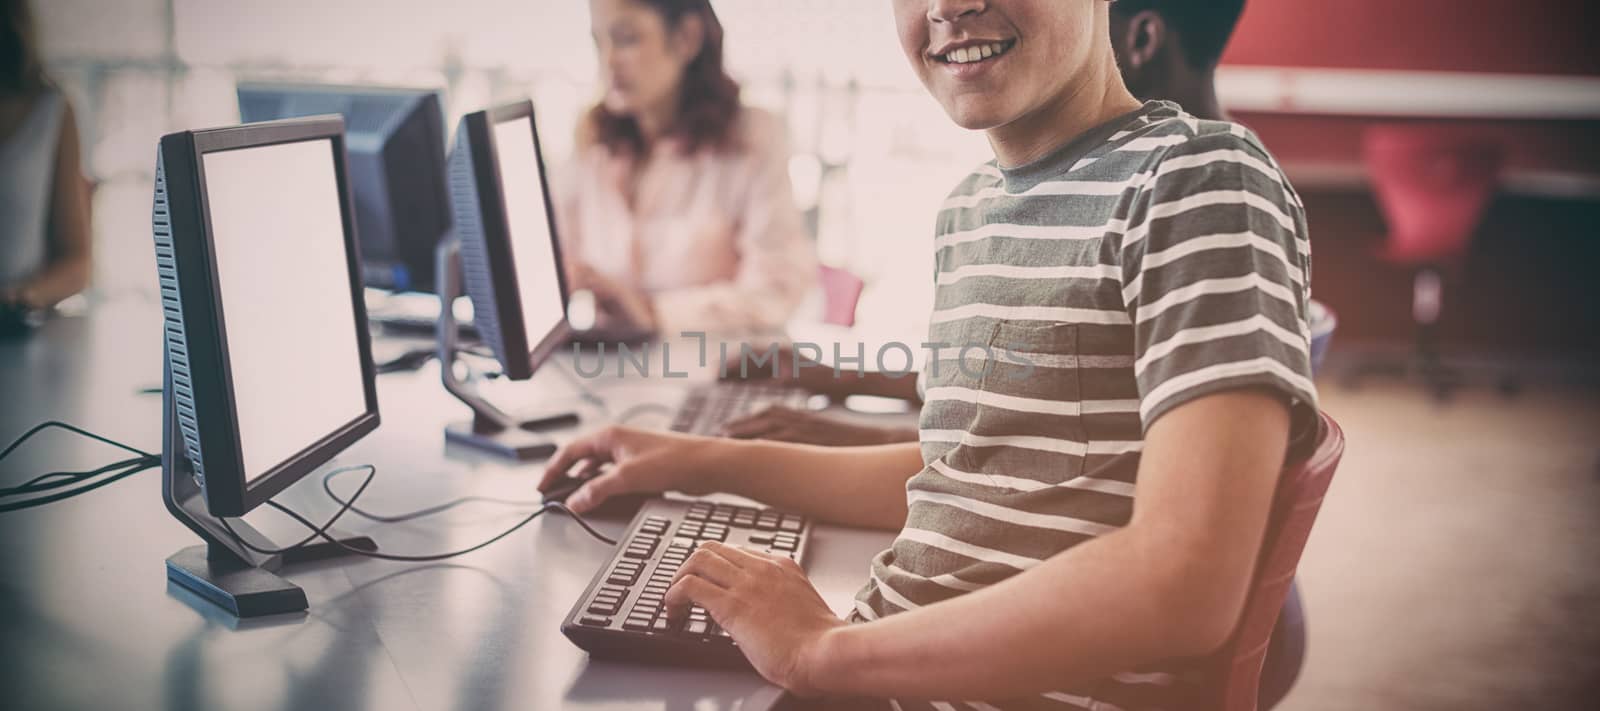 Student using computer in classroom by Wavebreakmedia